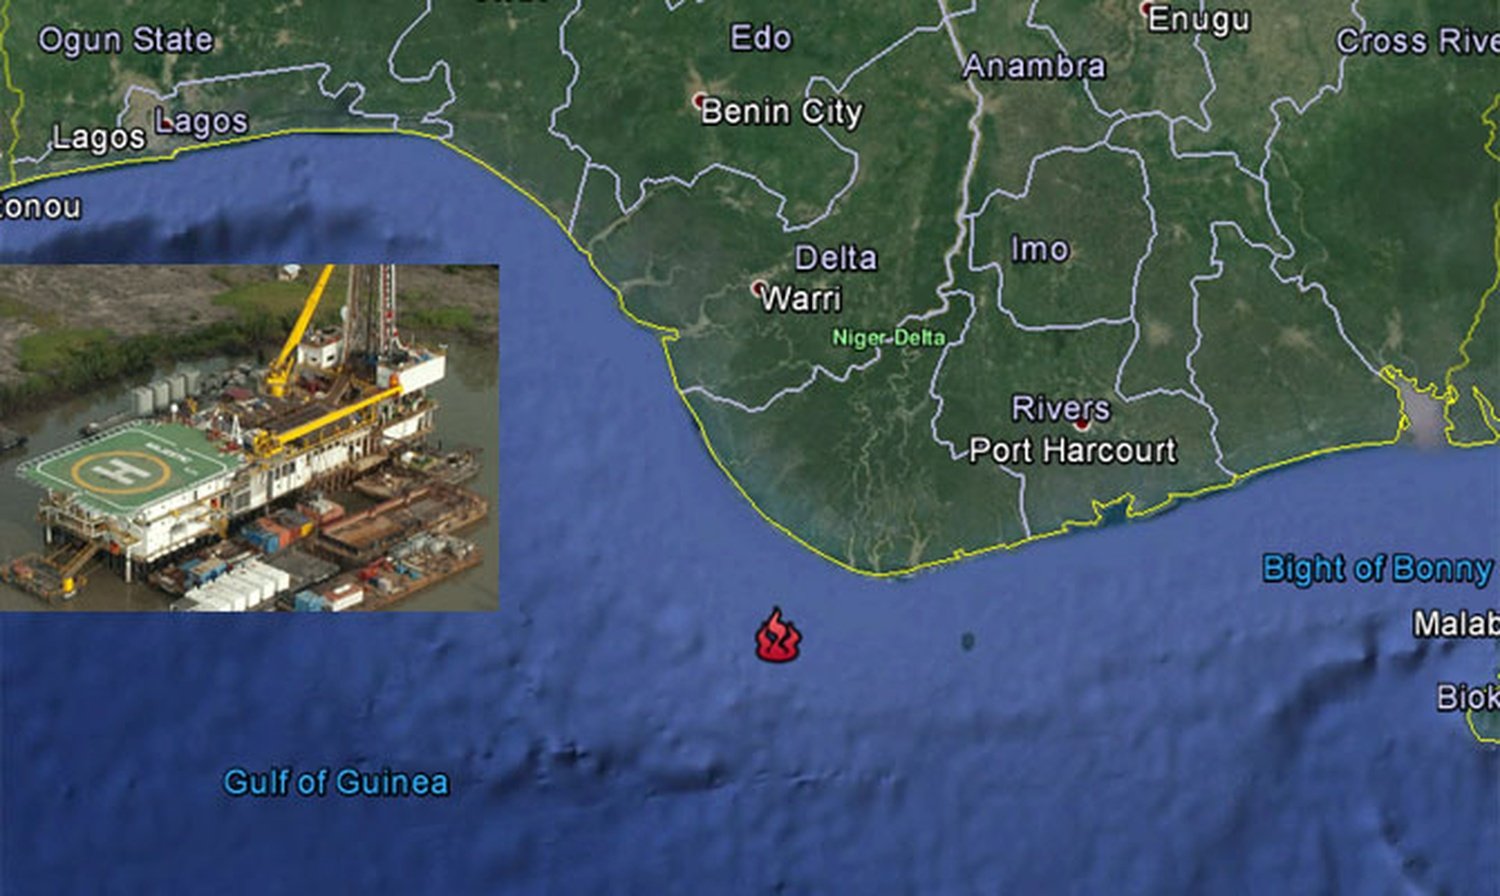 UPSTREAM: Seplat records incident on Majestic rig near Ovhor in Nigeria